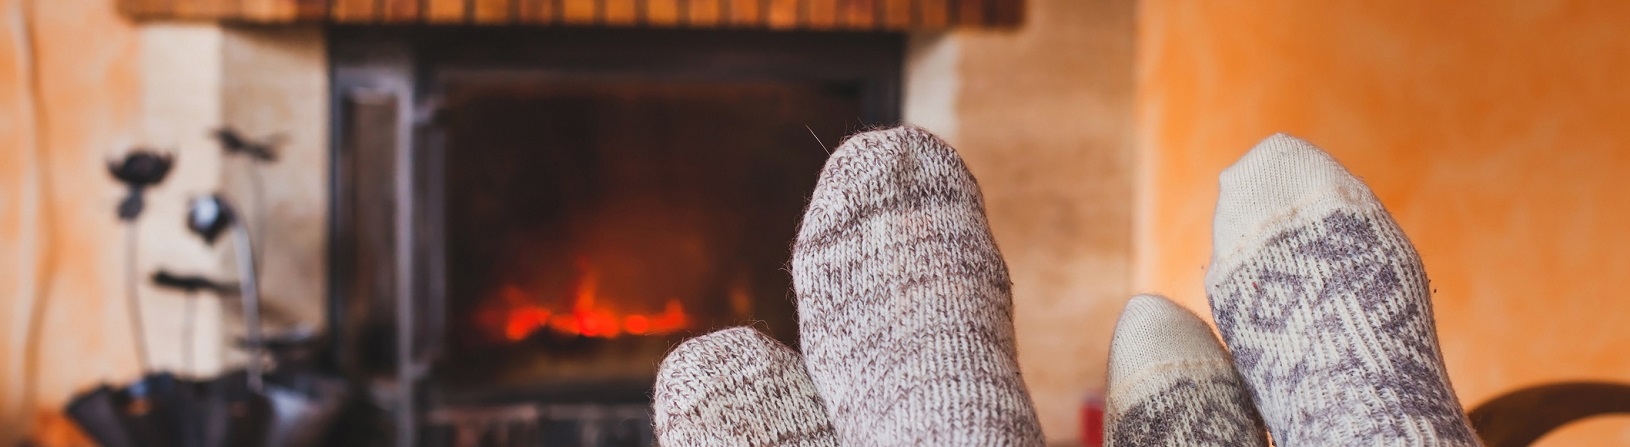 A homeowner’s guide to proper chimney and fireplace care